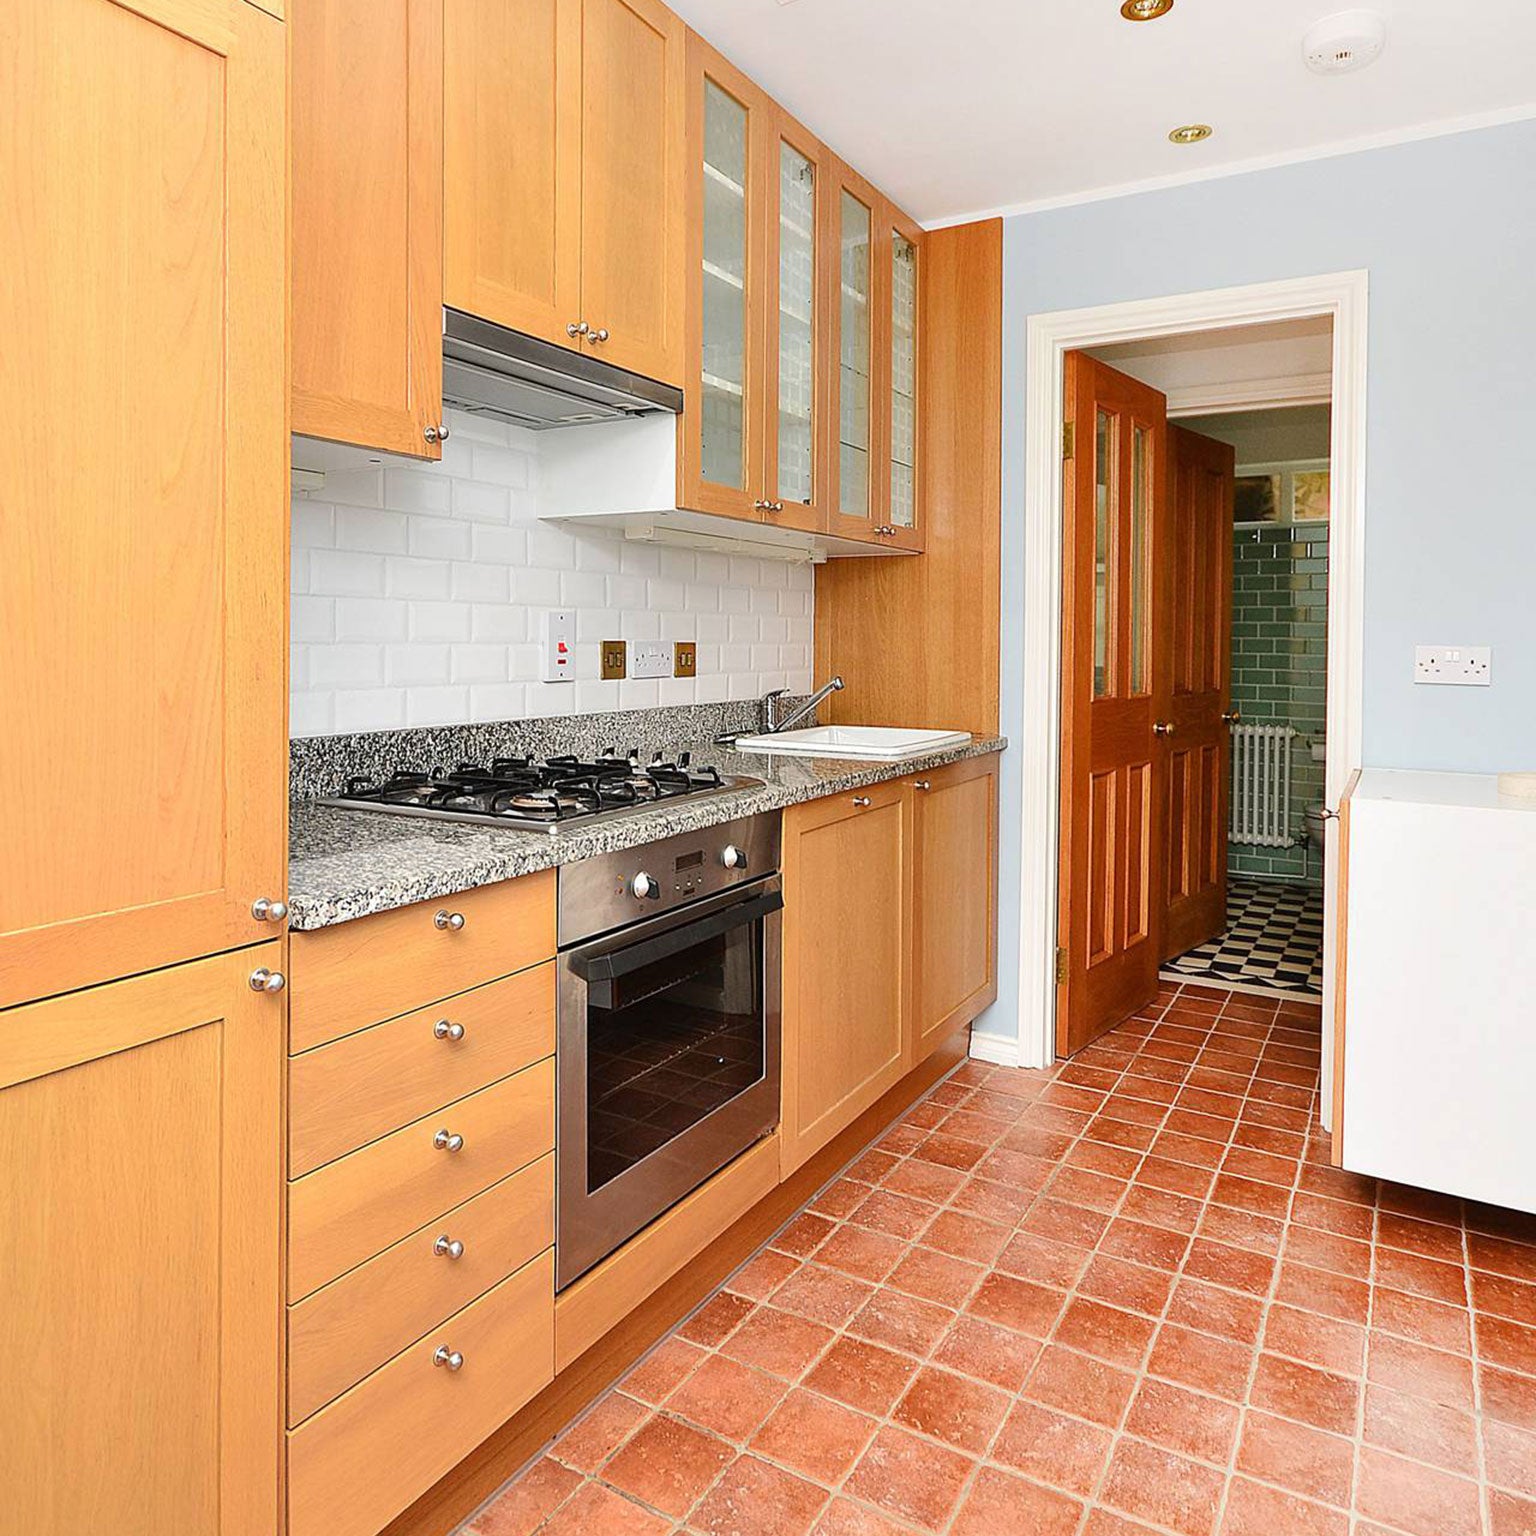 The kitchen inside the property (Foxtons)